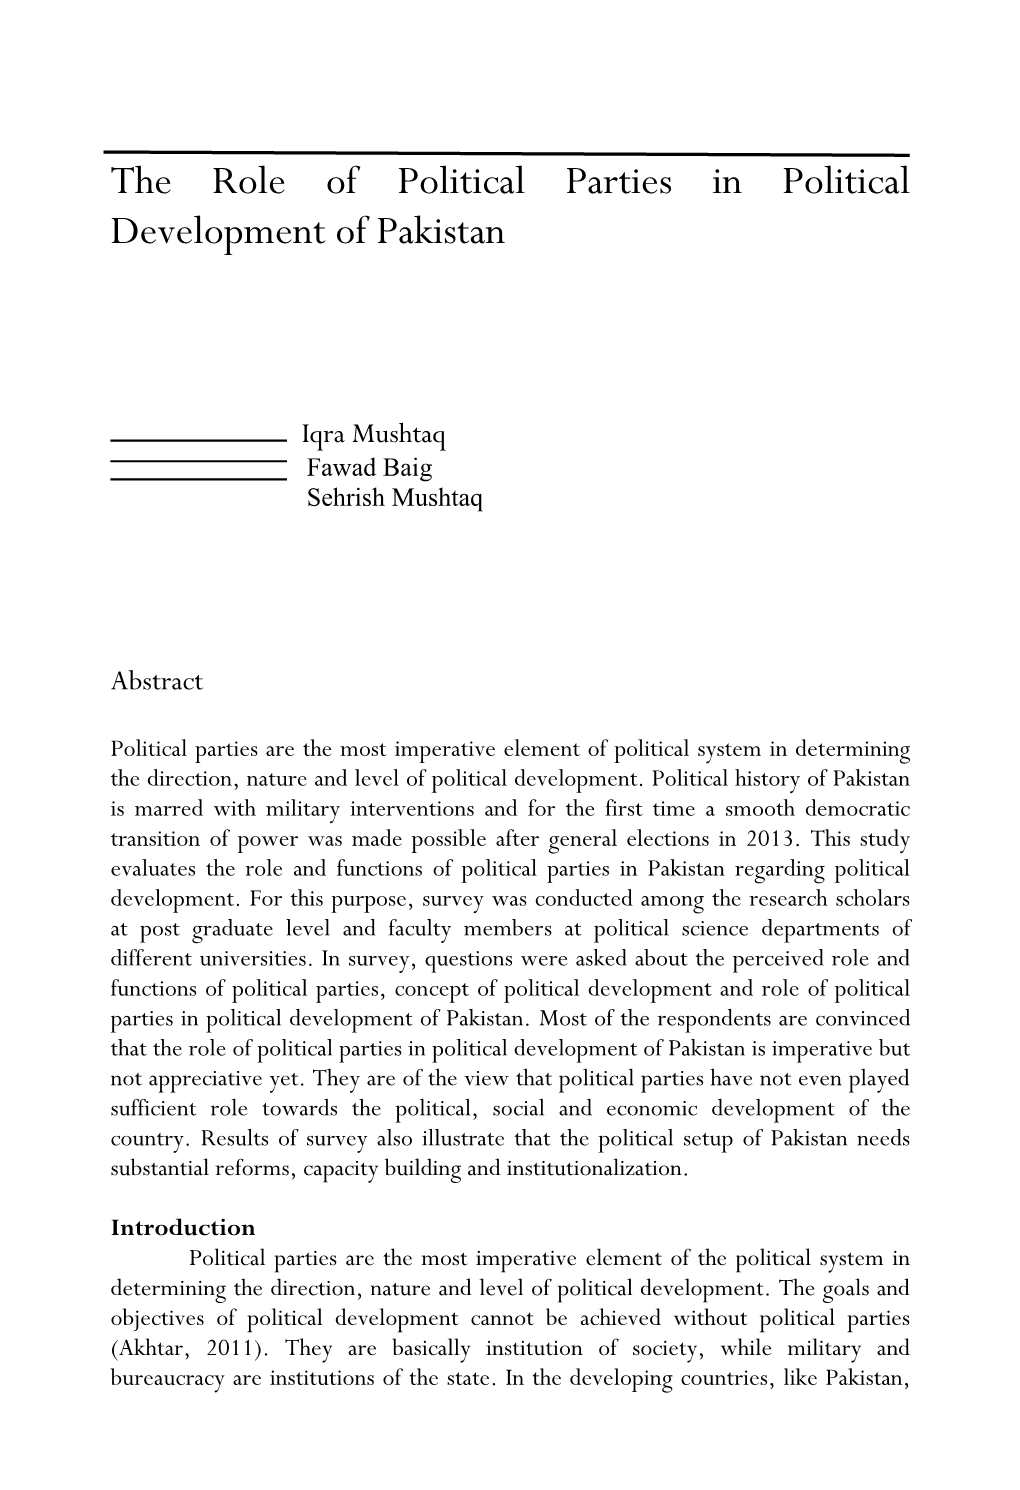 The Role of Political Parties in Political Development of Pakistan